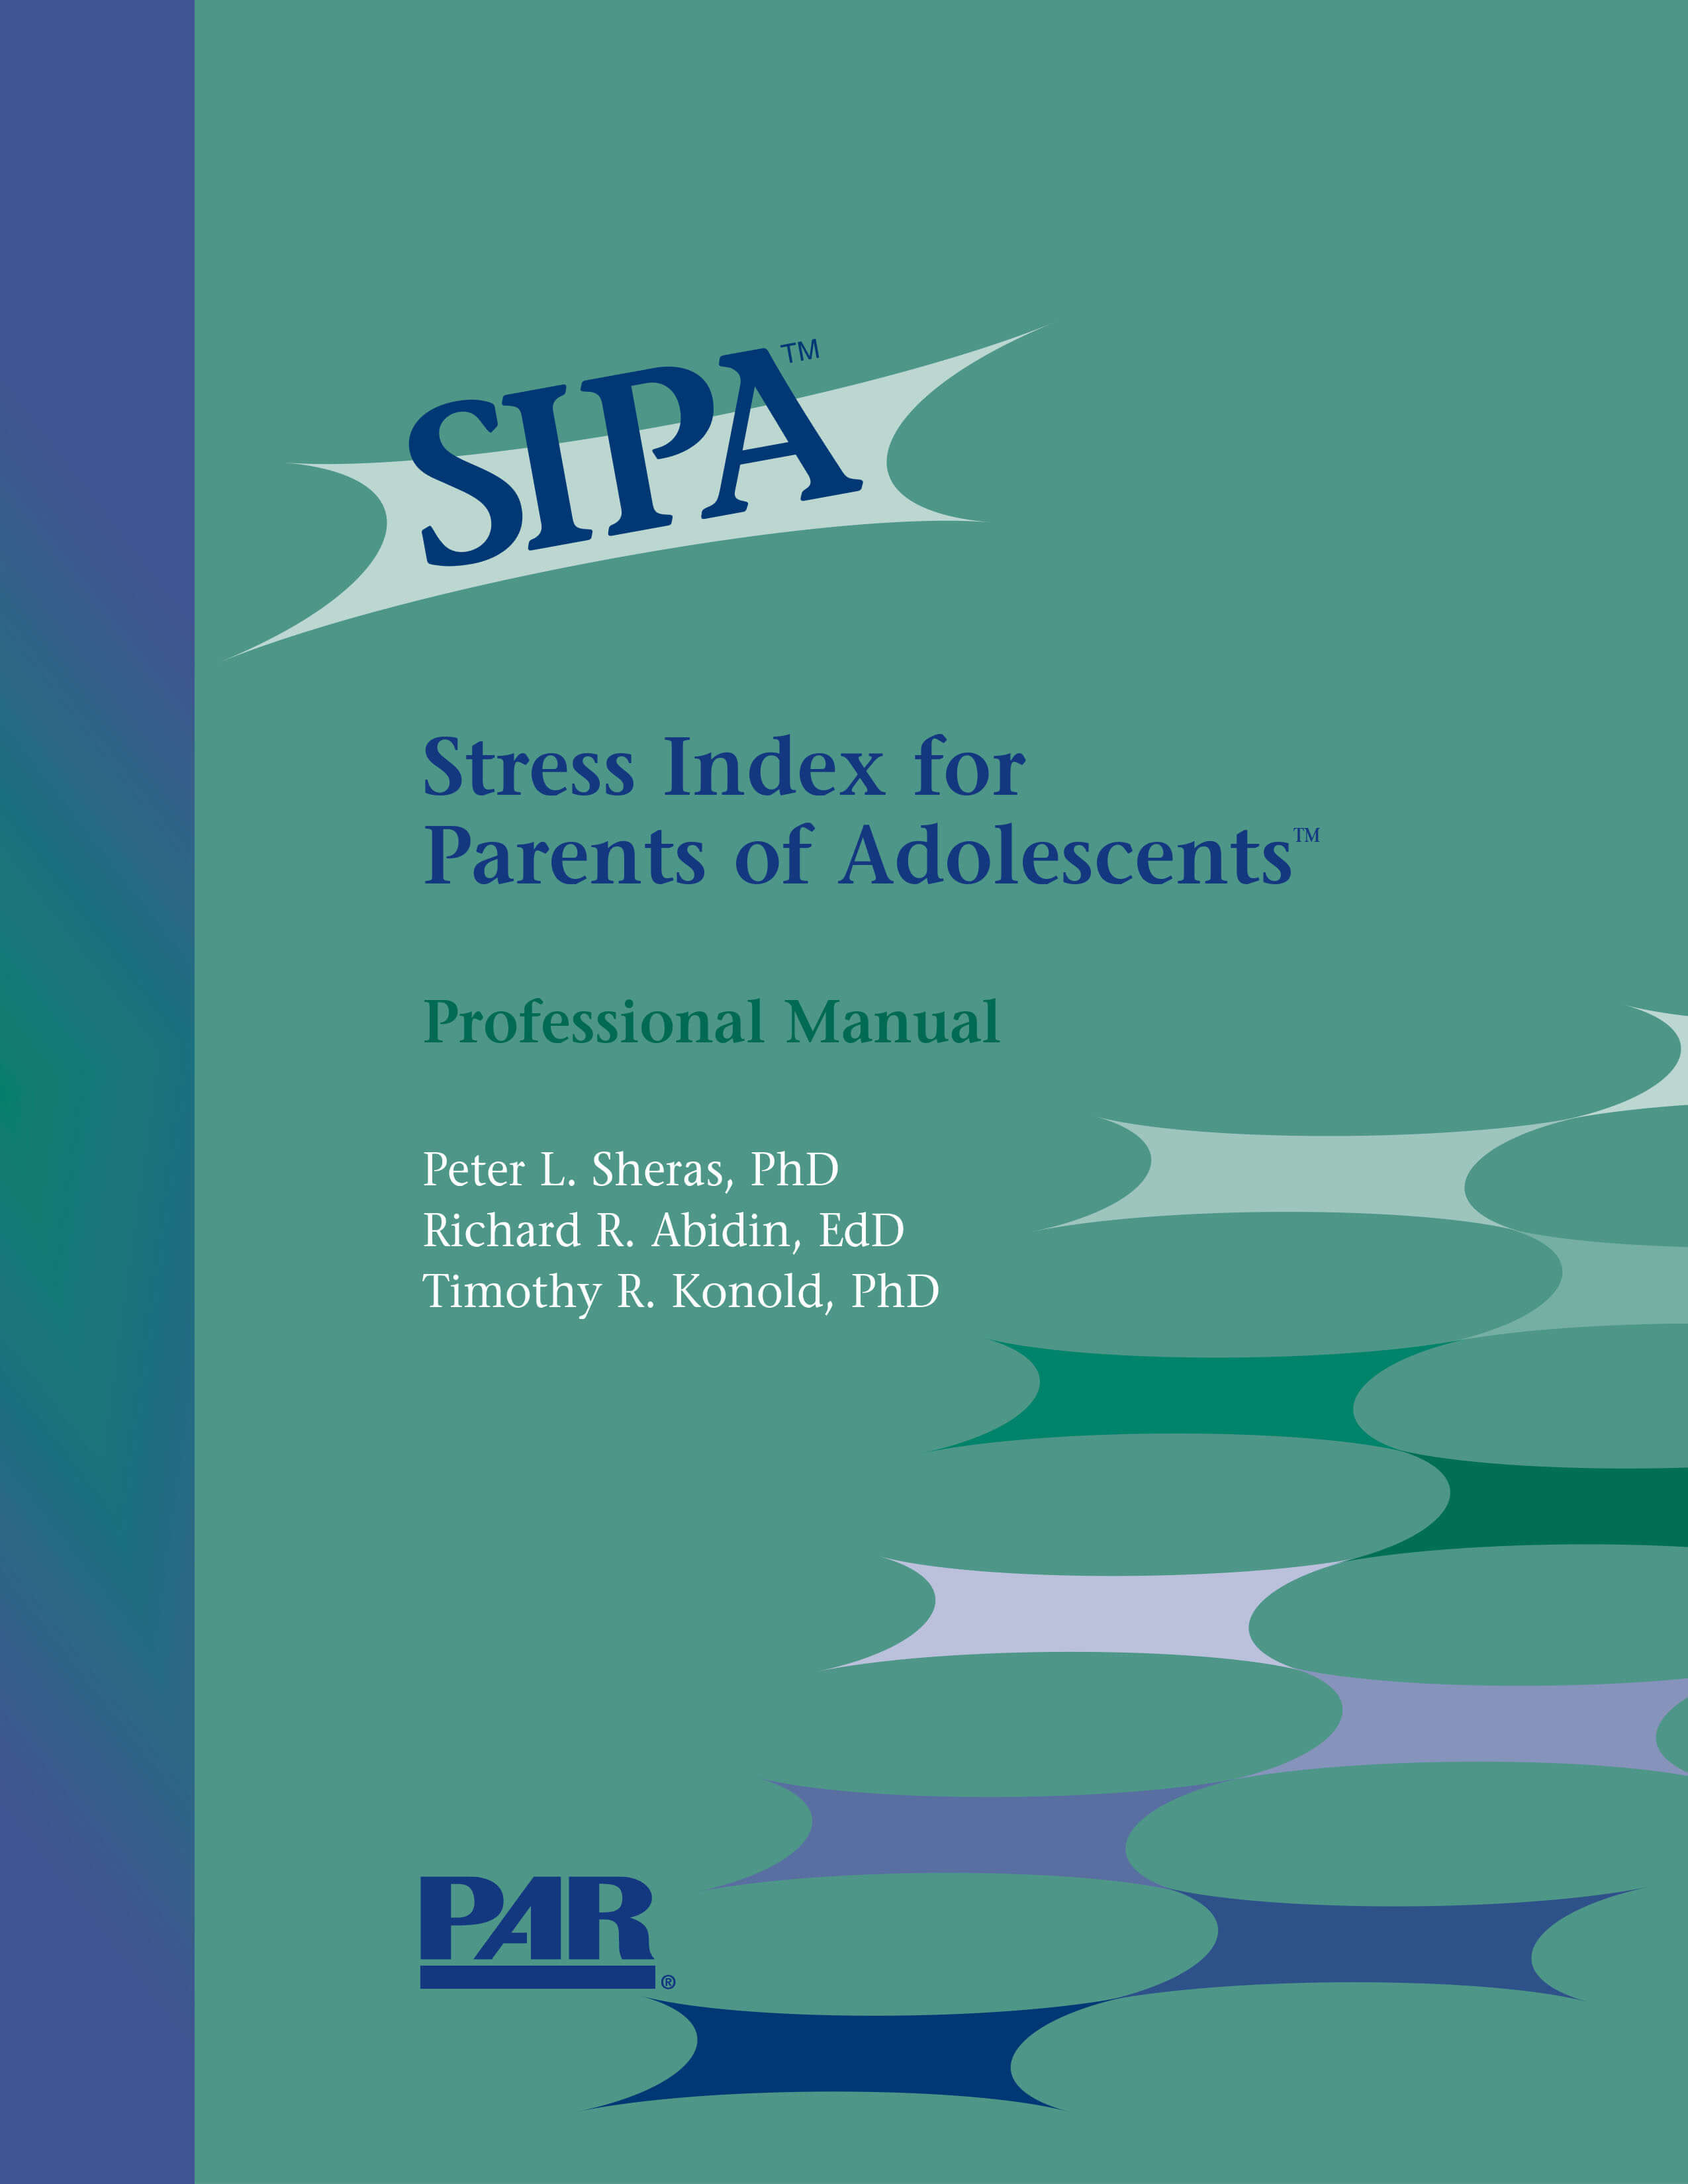 Stress Index for Parents of Adolescents™ - 